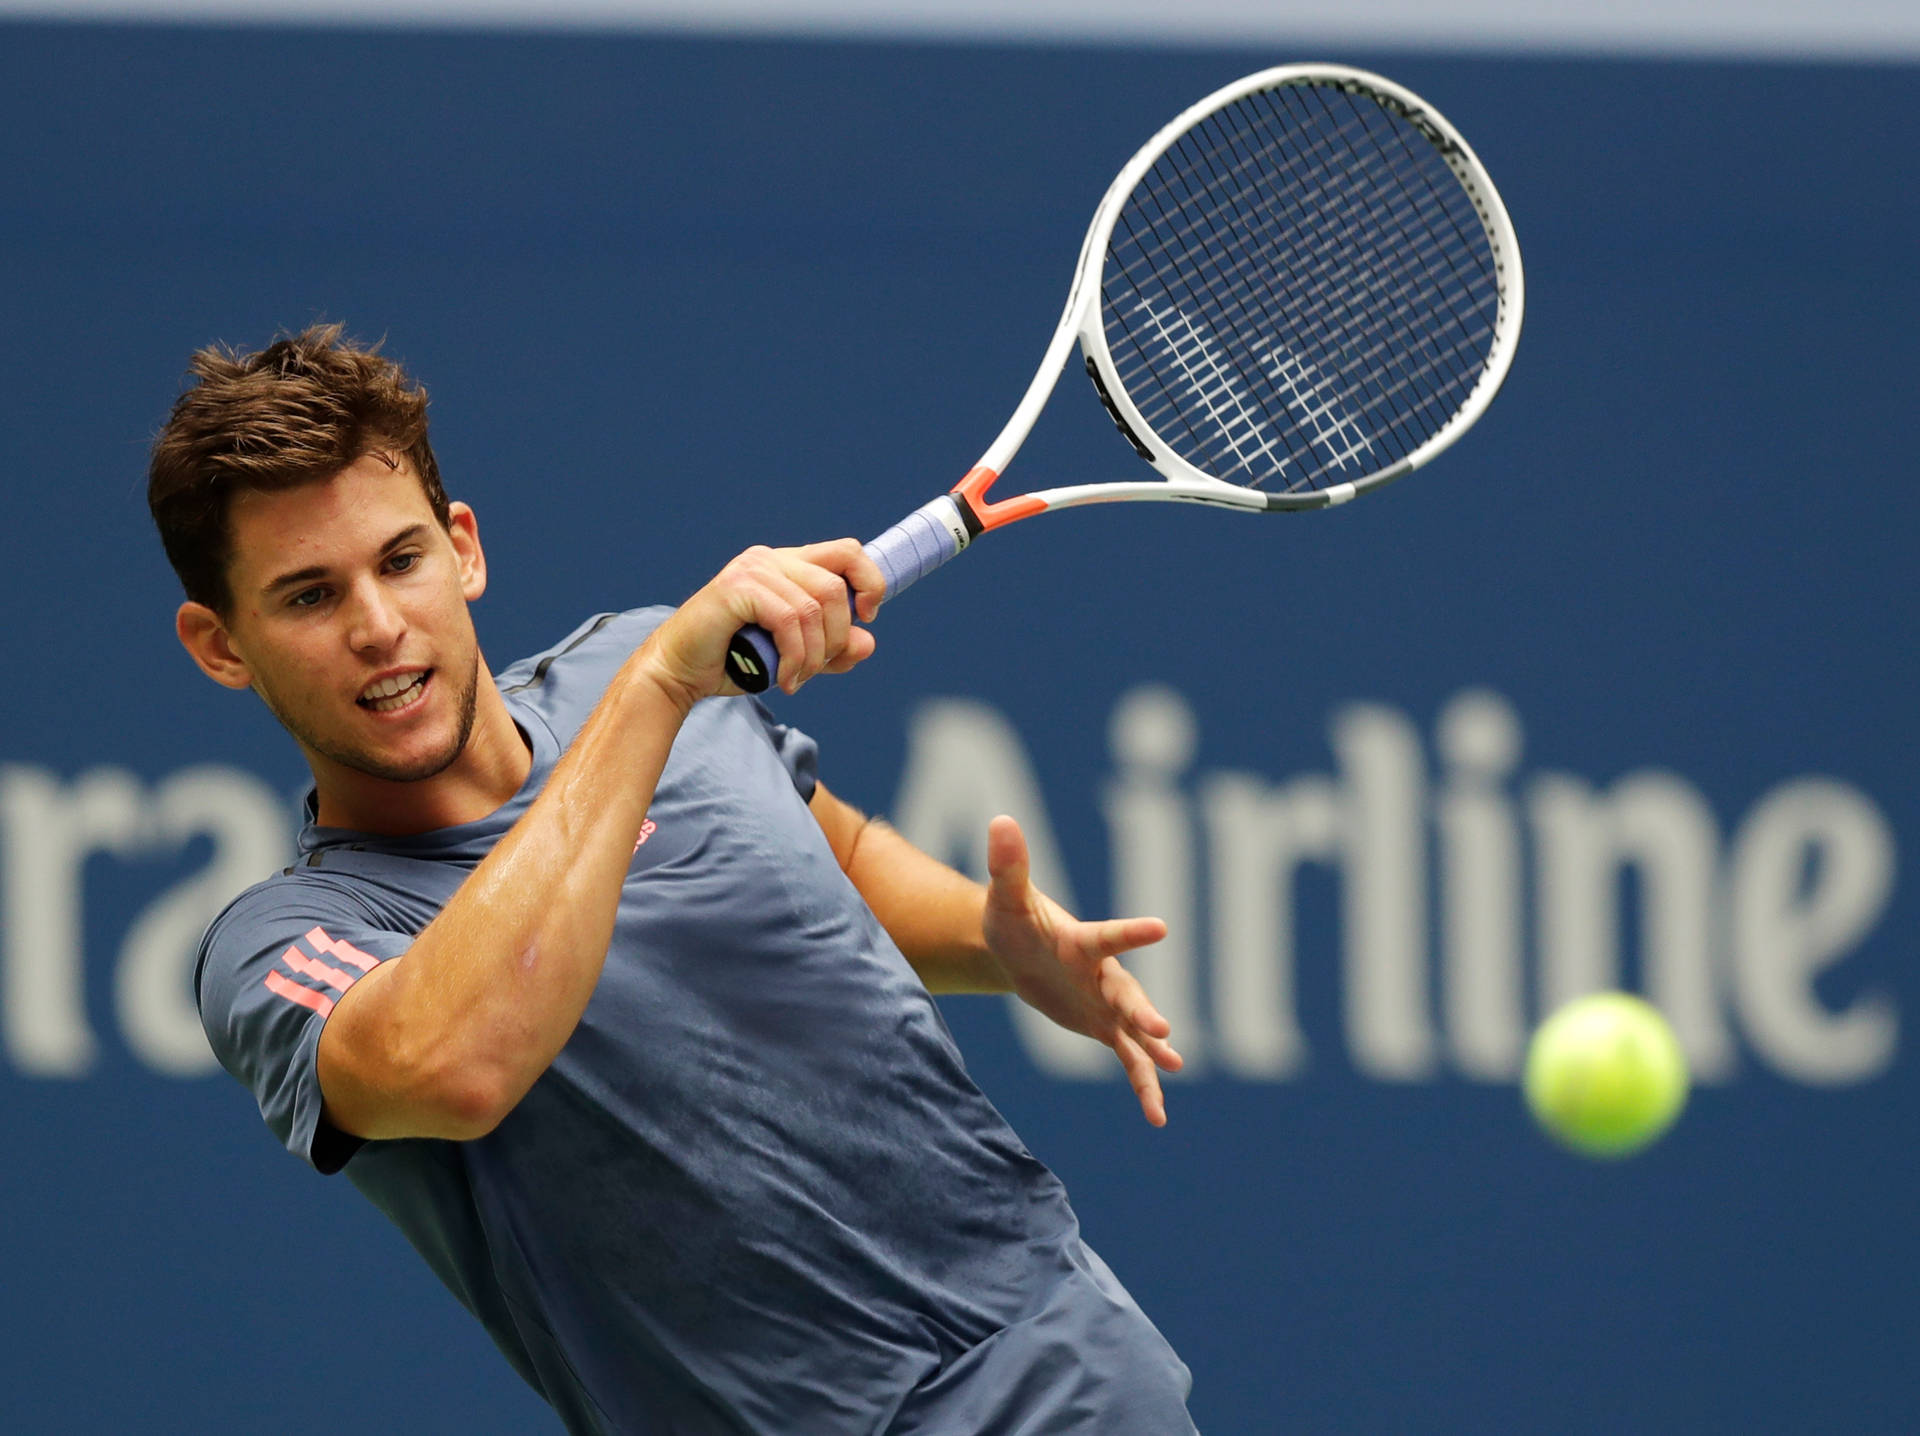 Dominic Thiem In Action On The Tennis Court